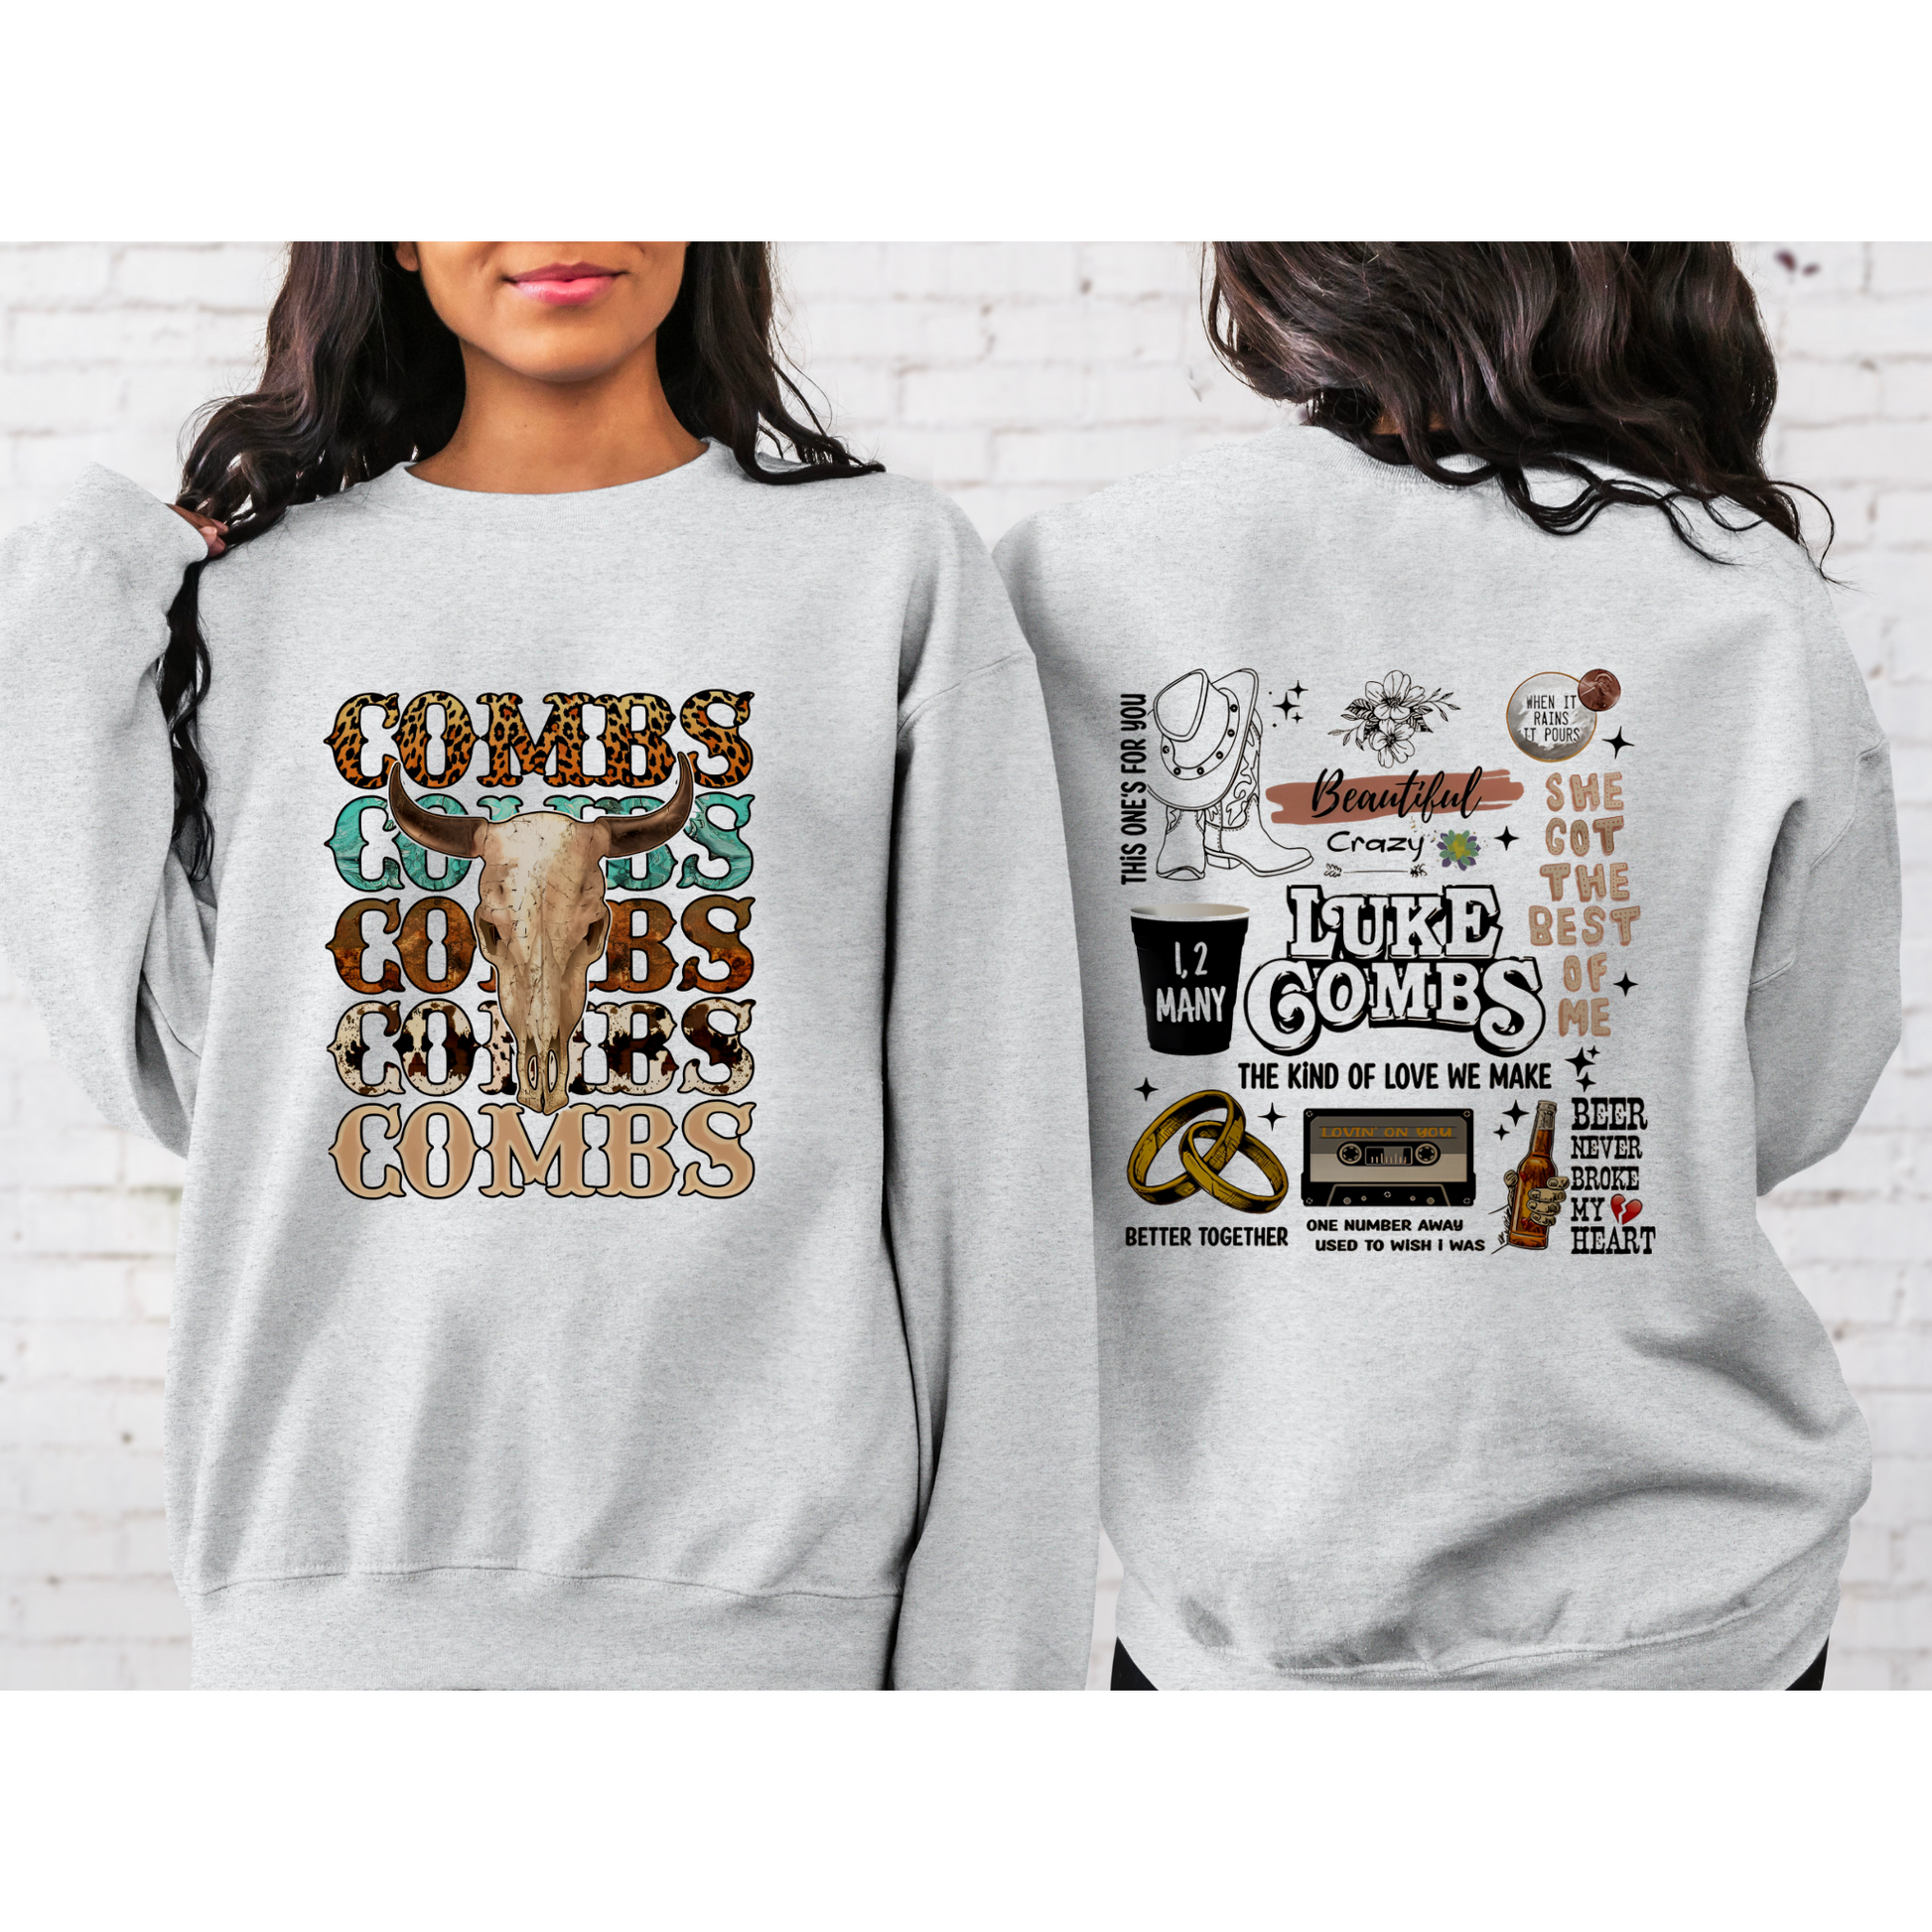 Luke Combs Full Front and Back Graphic Sweatshirt Ash